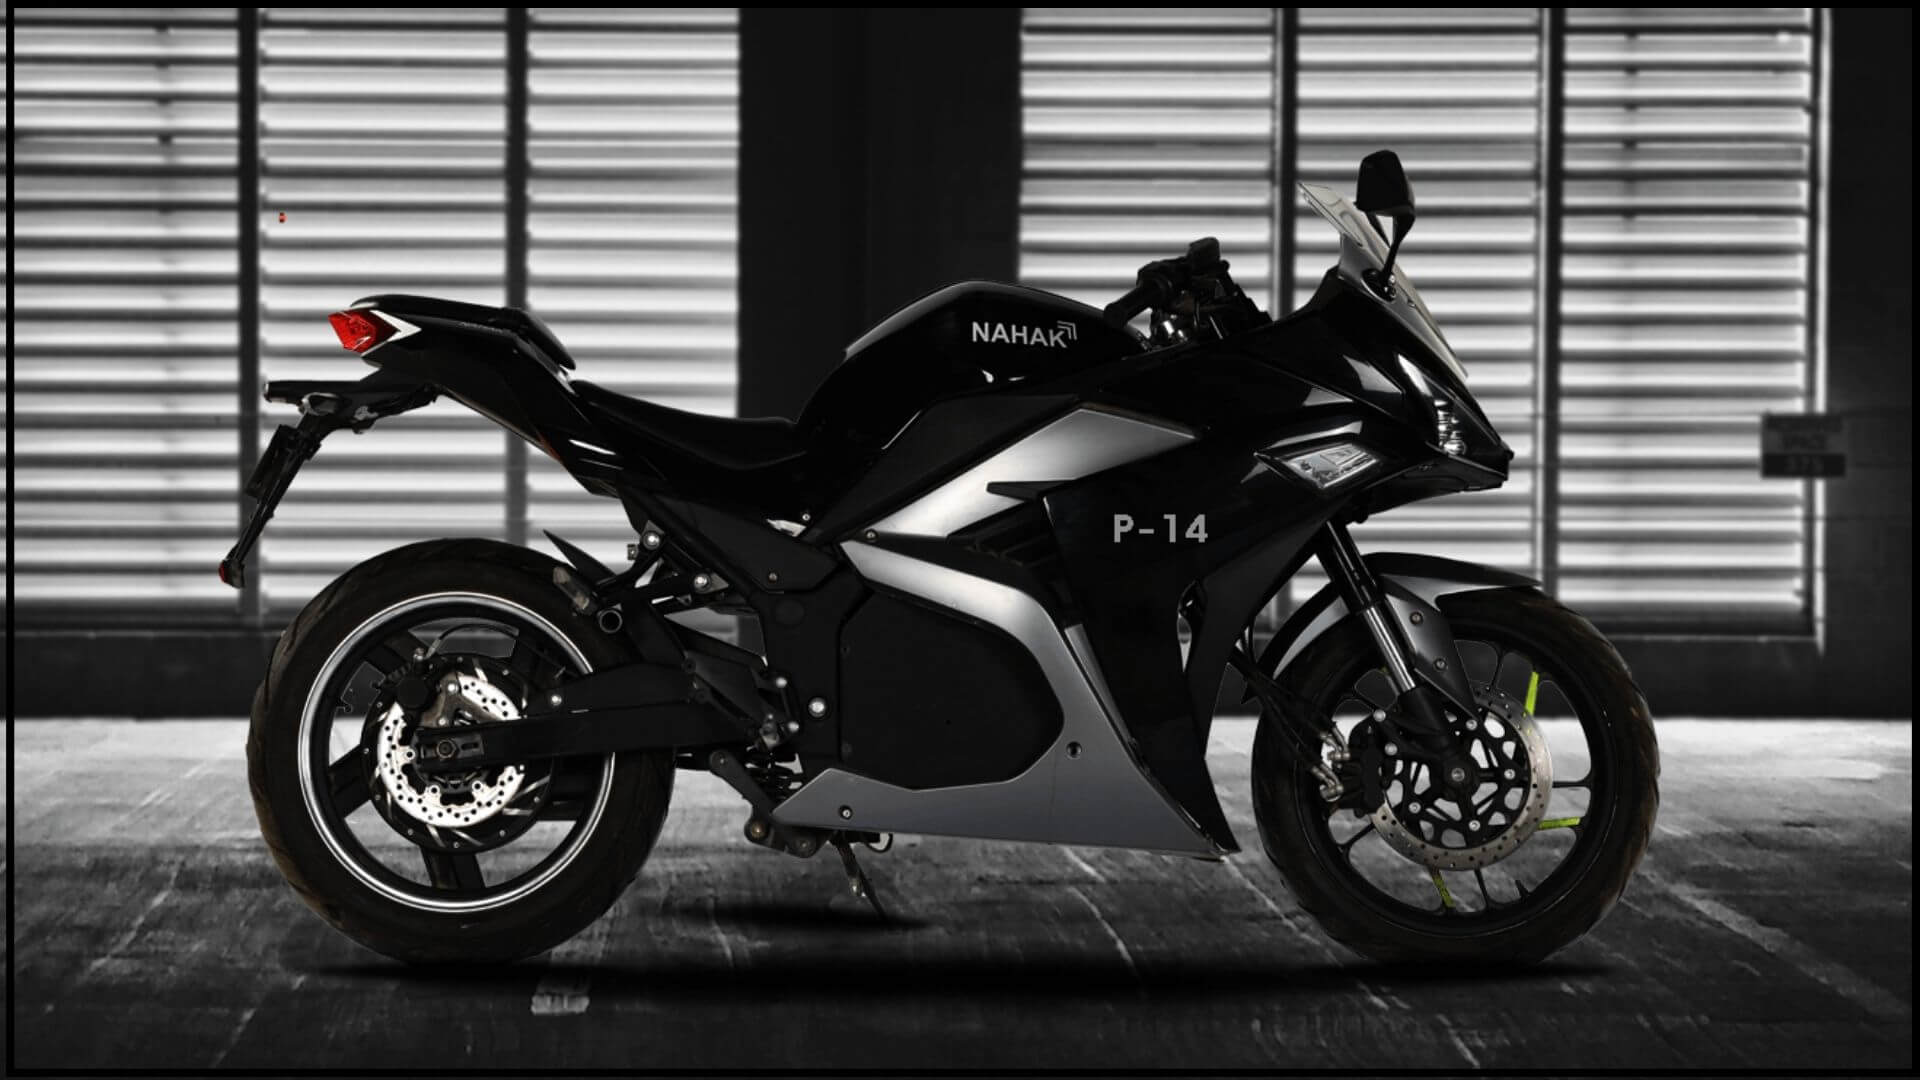 https://e-vehicleinfo.com/nahak-p-14-electric-motorcycle-launched-priced-at-rs-2-50-lakh/